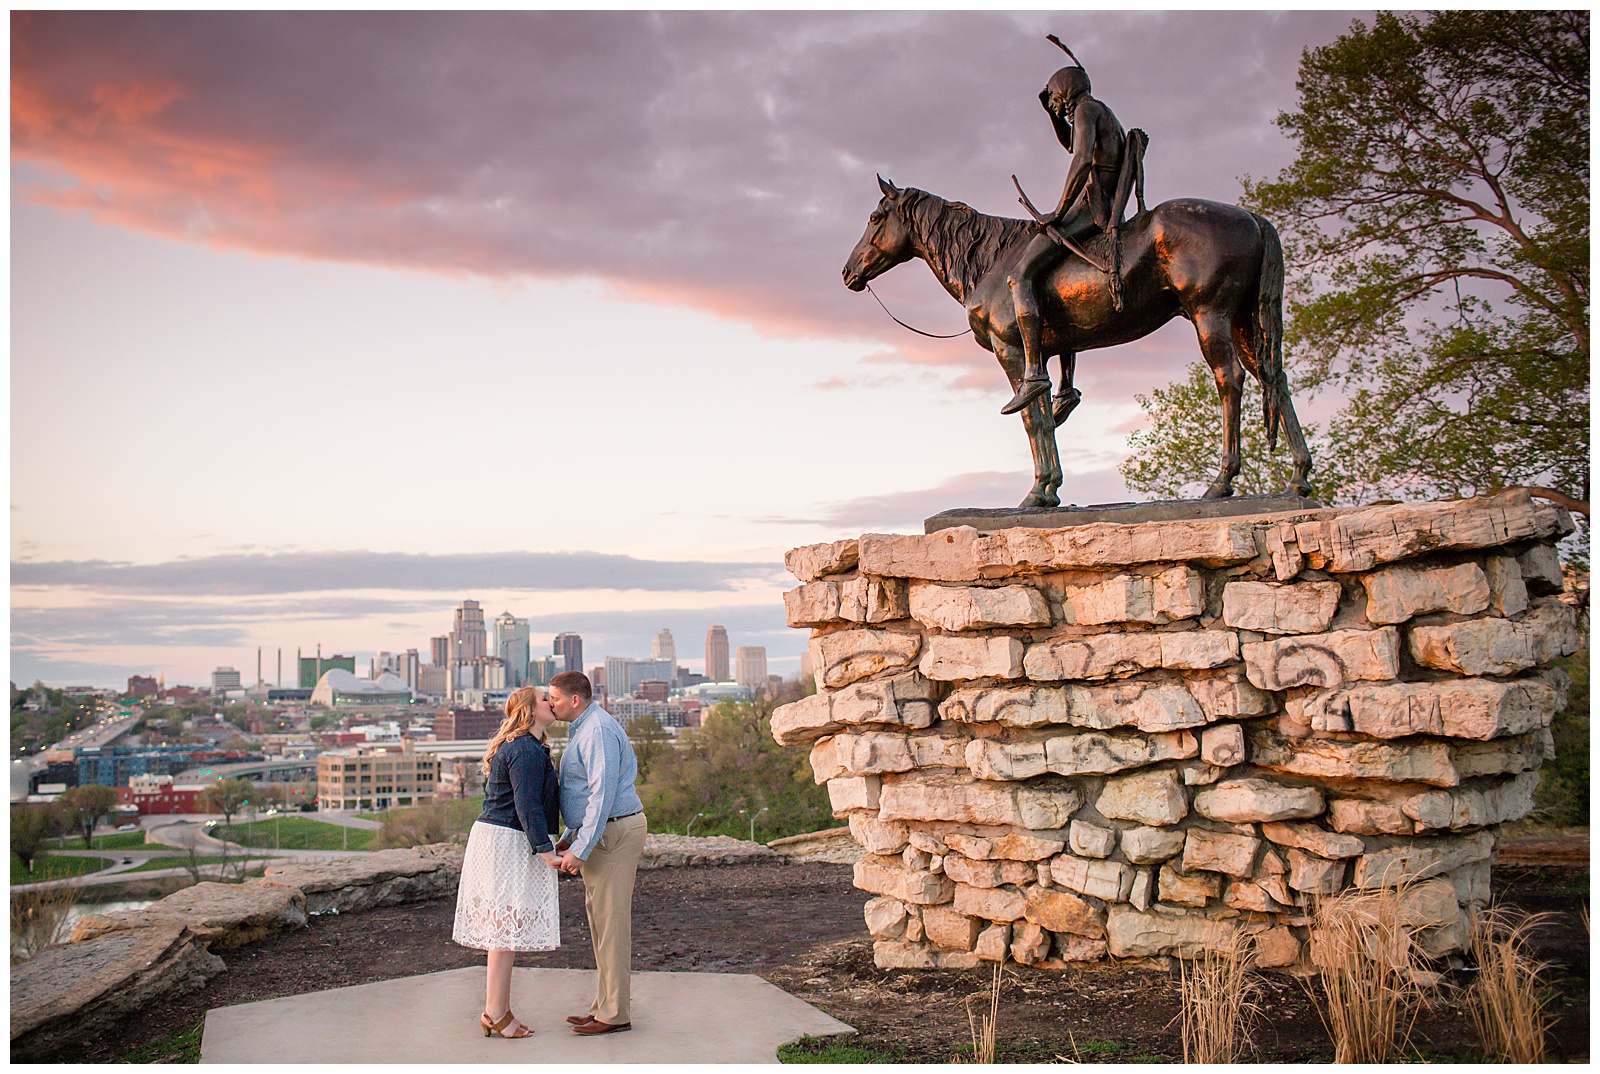 Engagement photography in the West Bottoms and Penn Valley Park by Kansas City wedding photographers Wisdom-Watson Weddings.